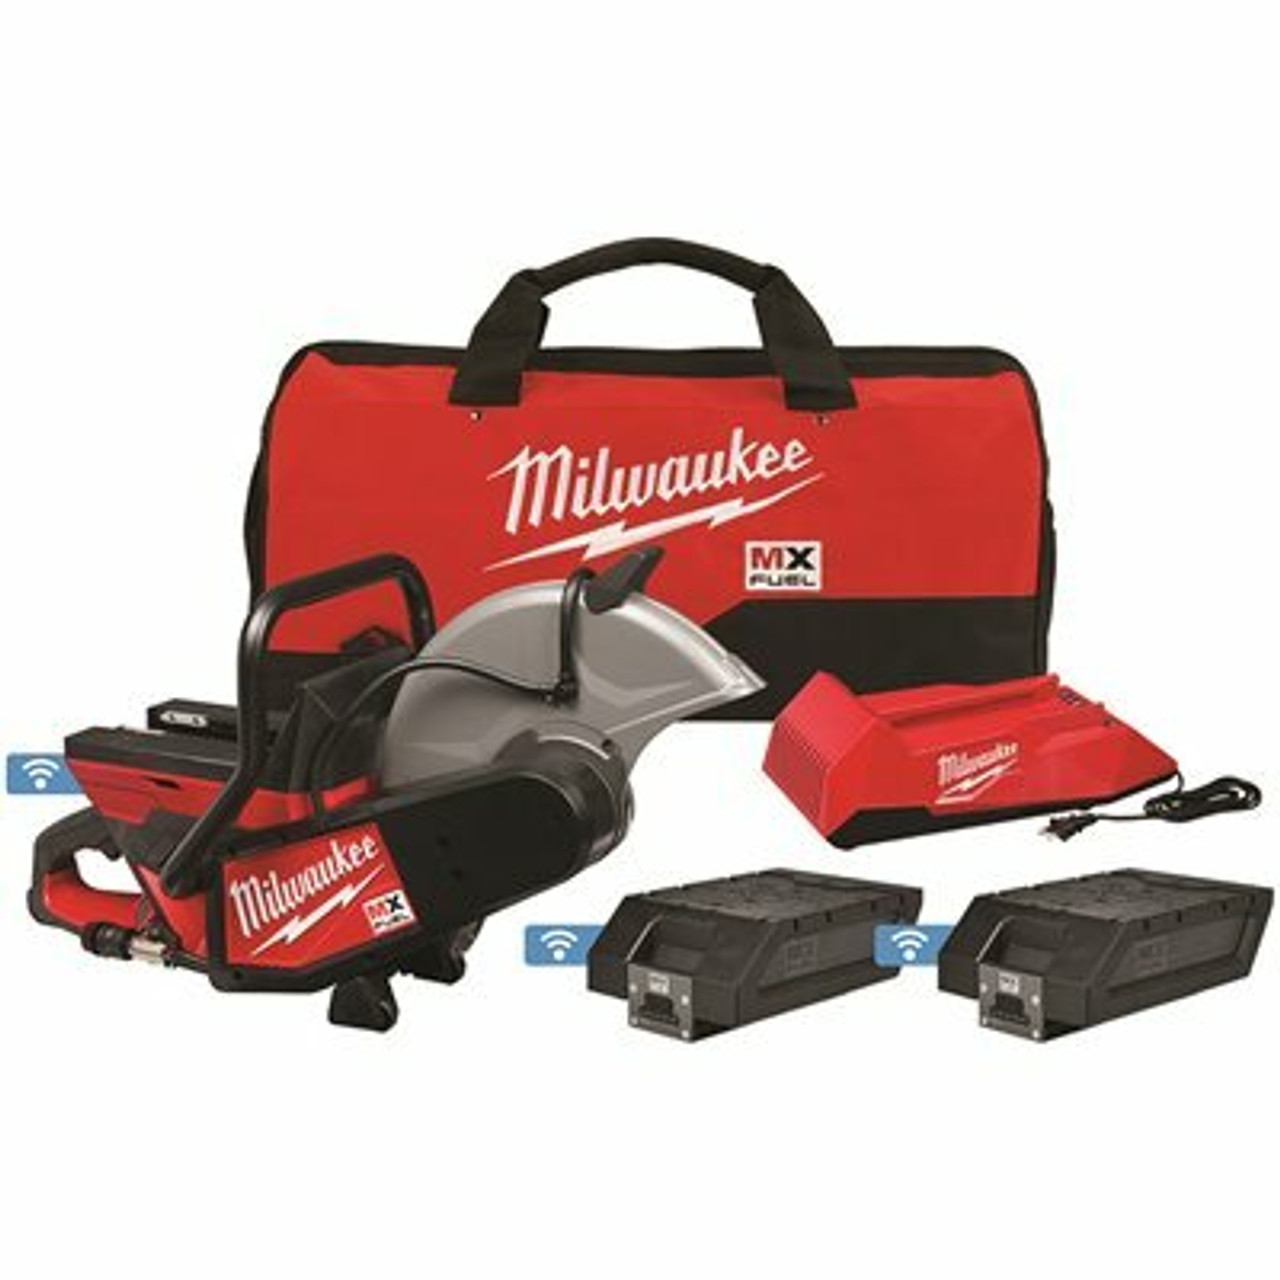 Milwaukee Mx Fuel Lithium-Ion Cordless 14 In. Cut Off Saw Kit With (2) Batteries And Charger